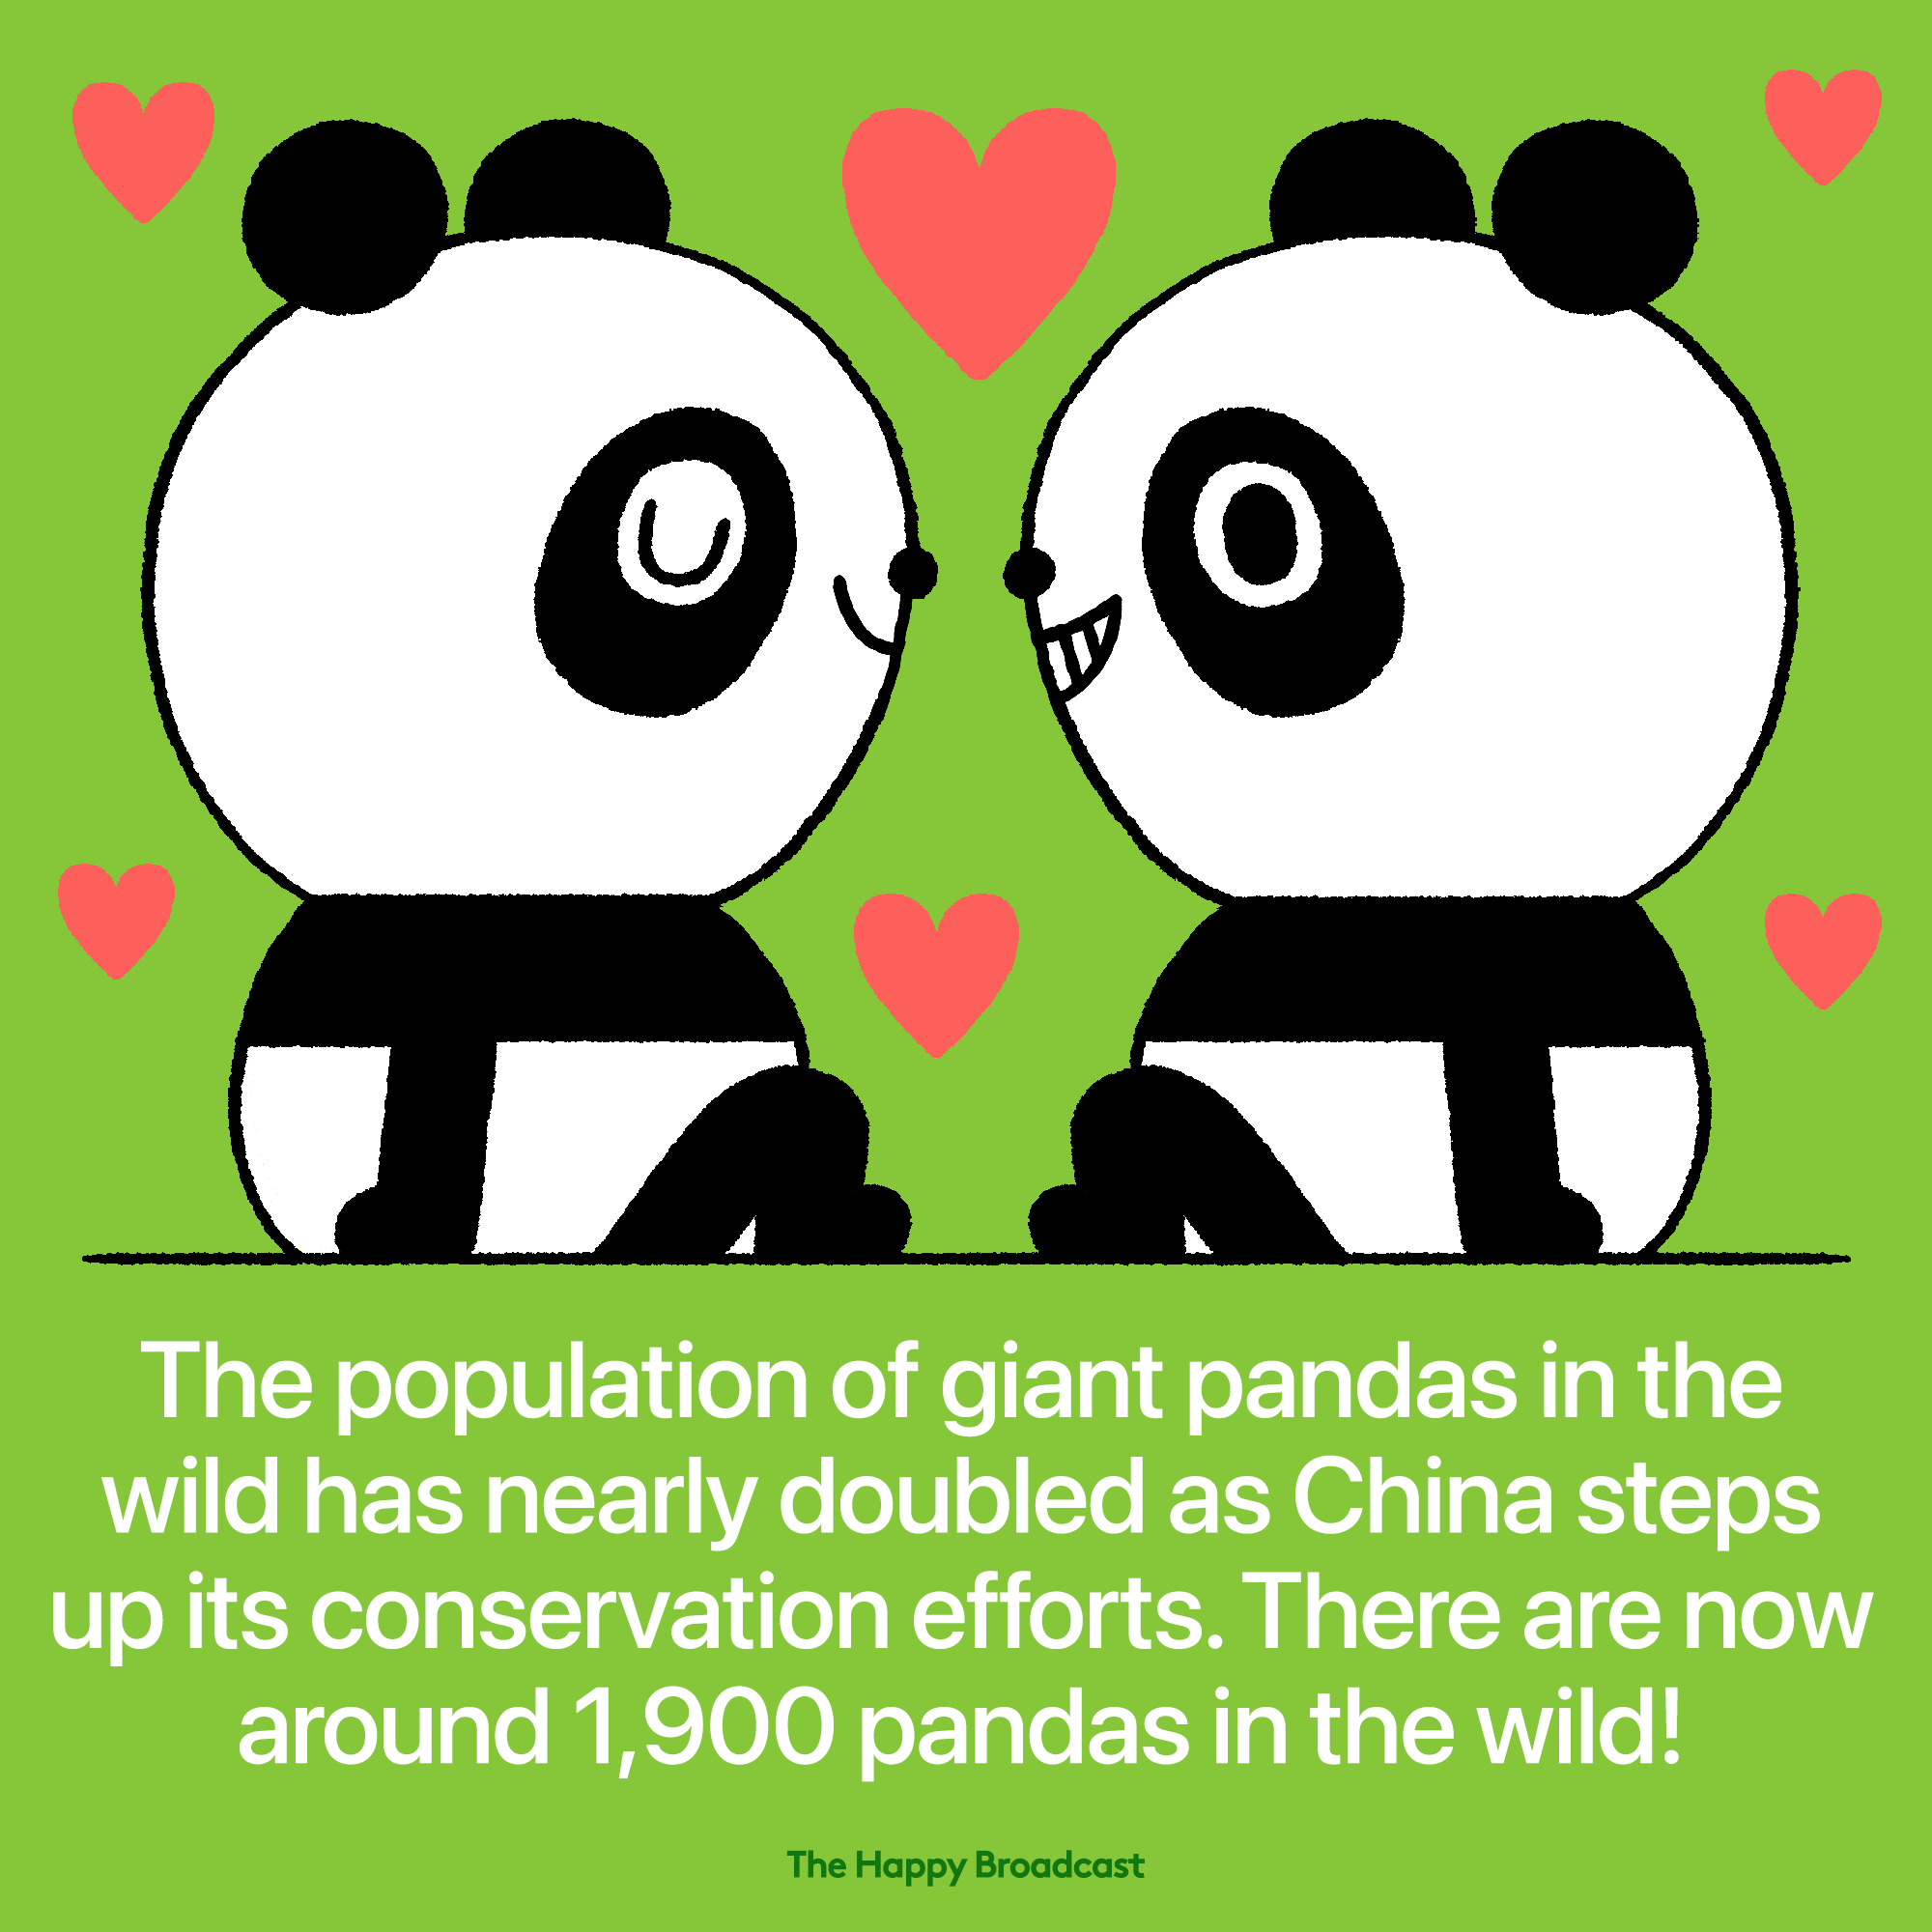 Giant pandas in the wild has doubled